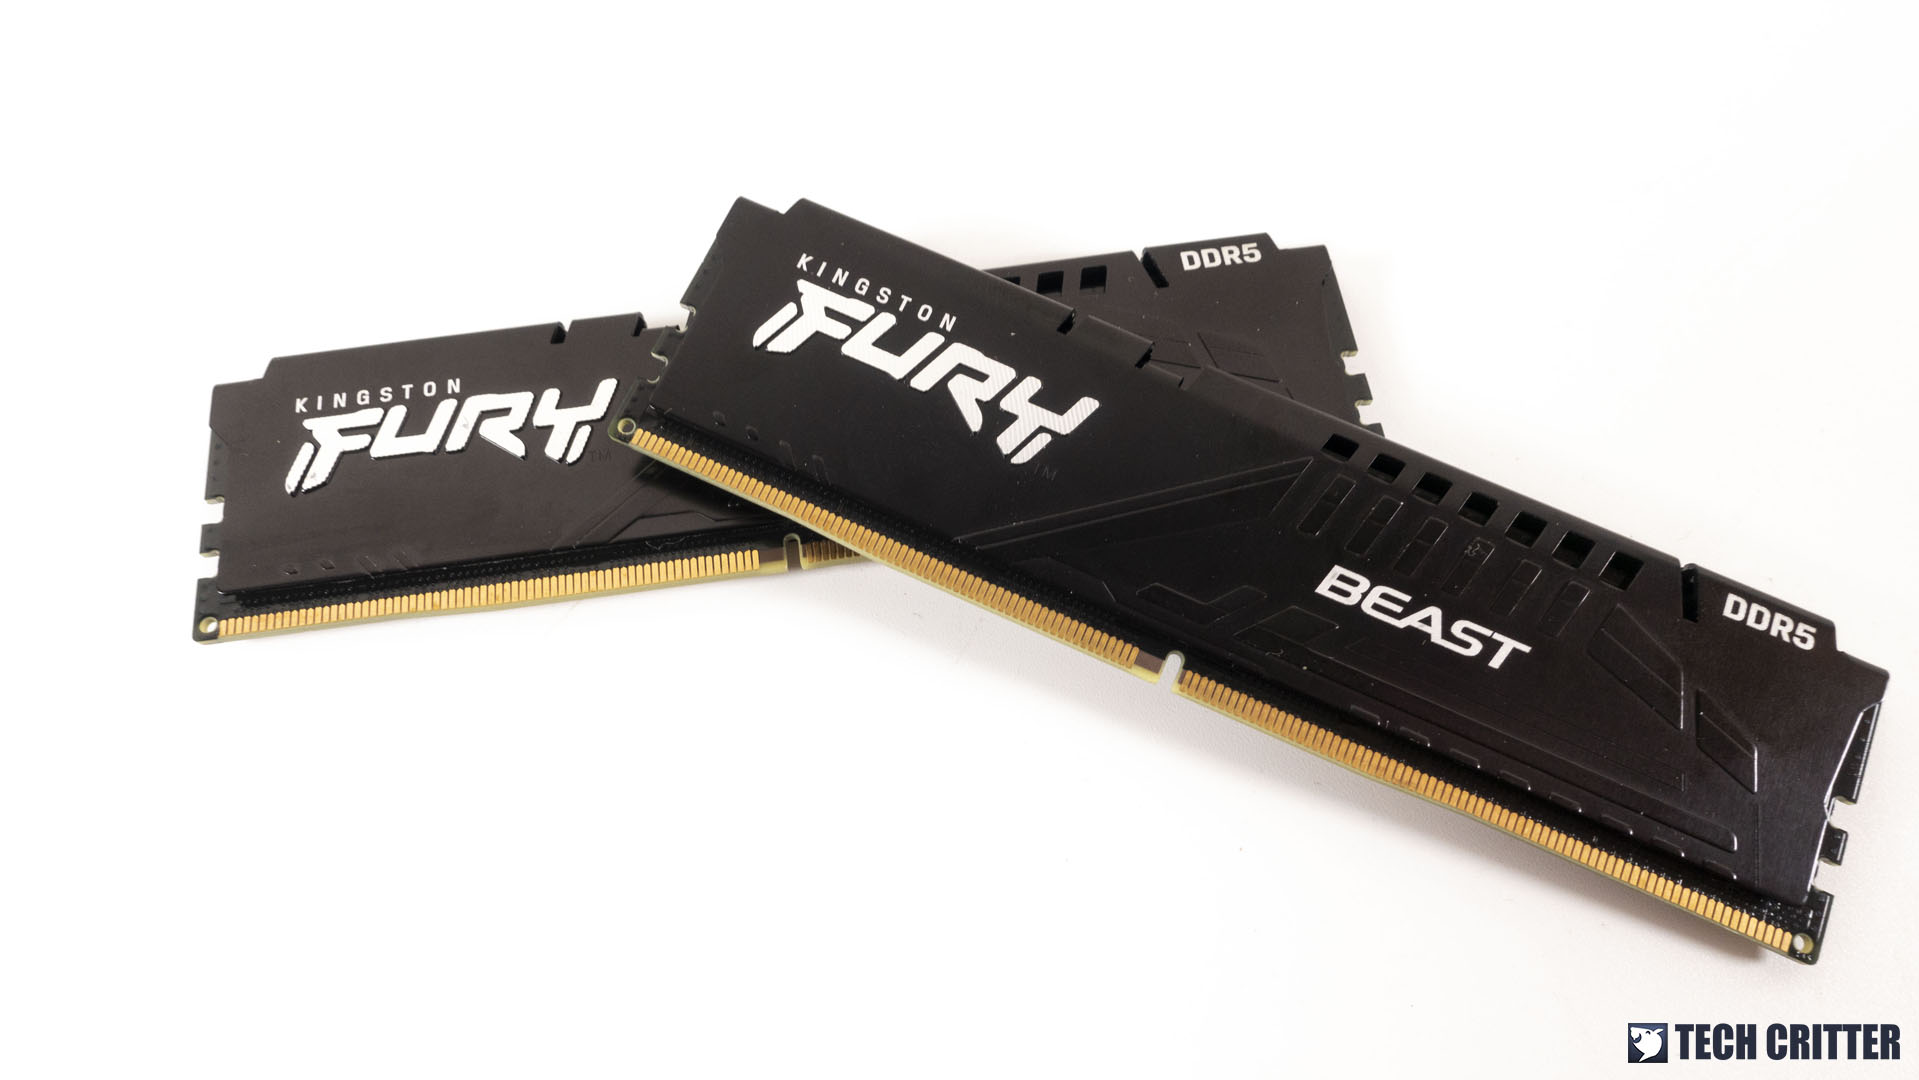 Hands-on & Overview - Kingston Fury Beast DDR5-5200 Memory Kit